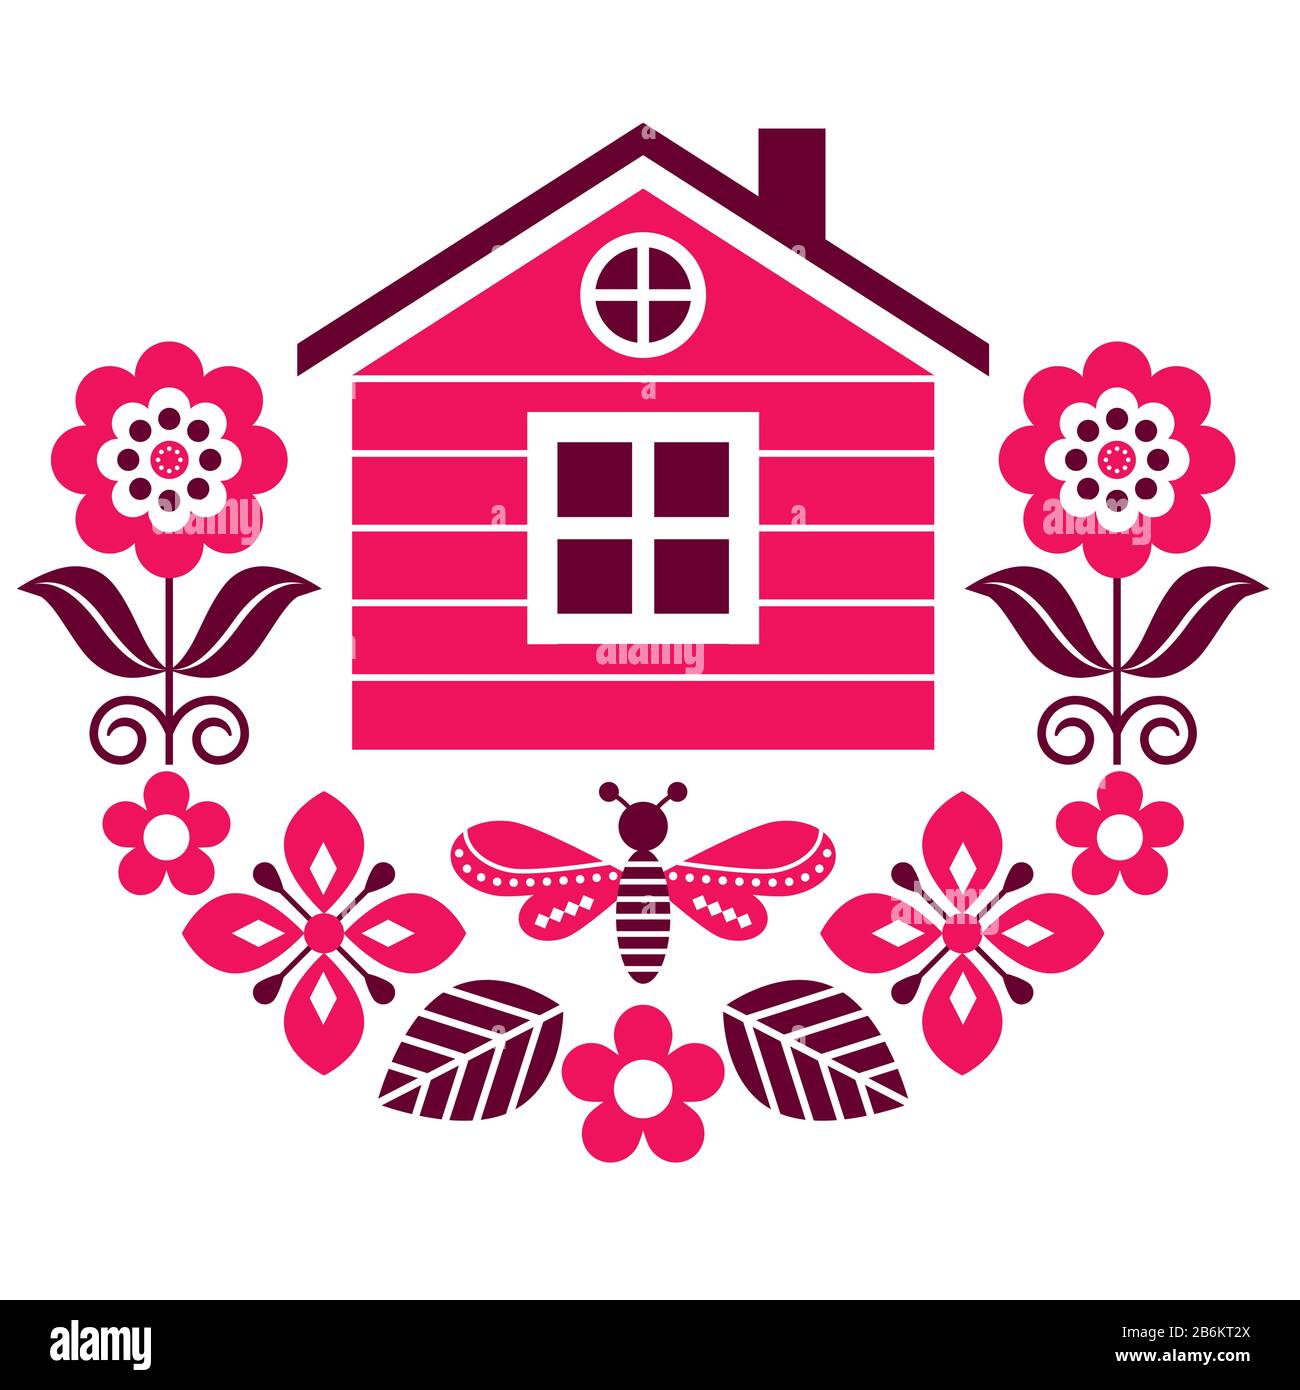 Scandinavian folk art vector cute floral pattern with Finnish or Norwegian house, greeting card with flowers in red and brown Stock Vector